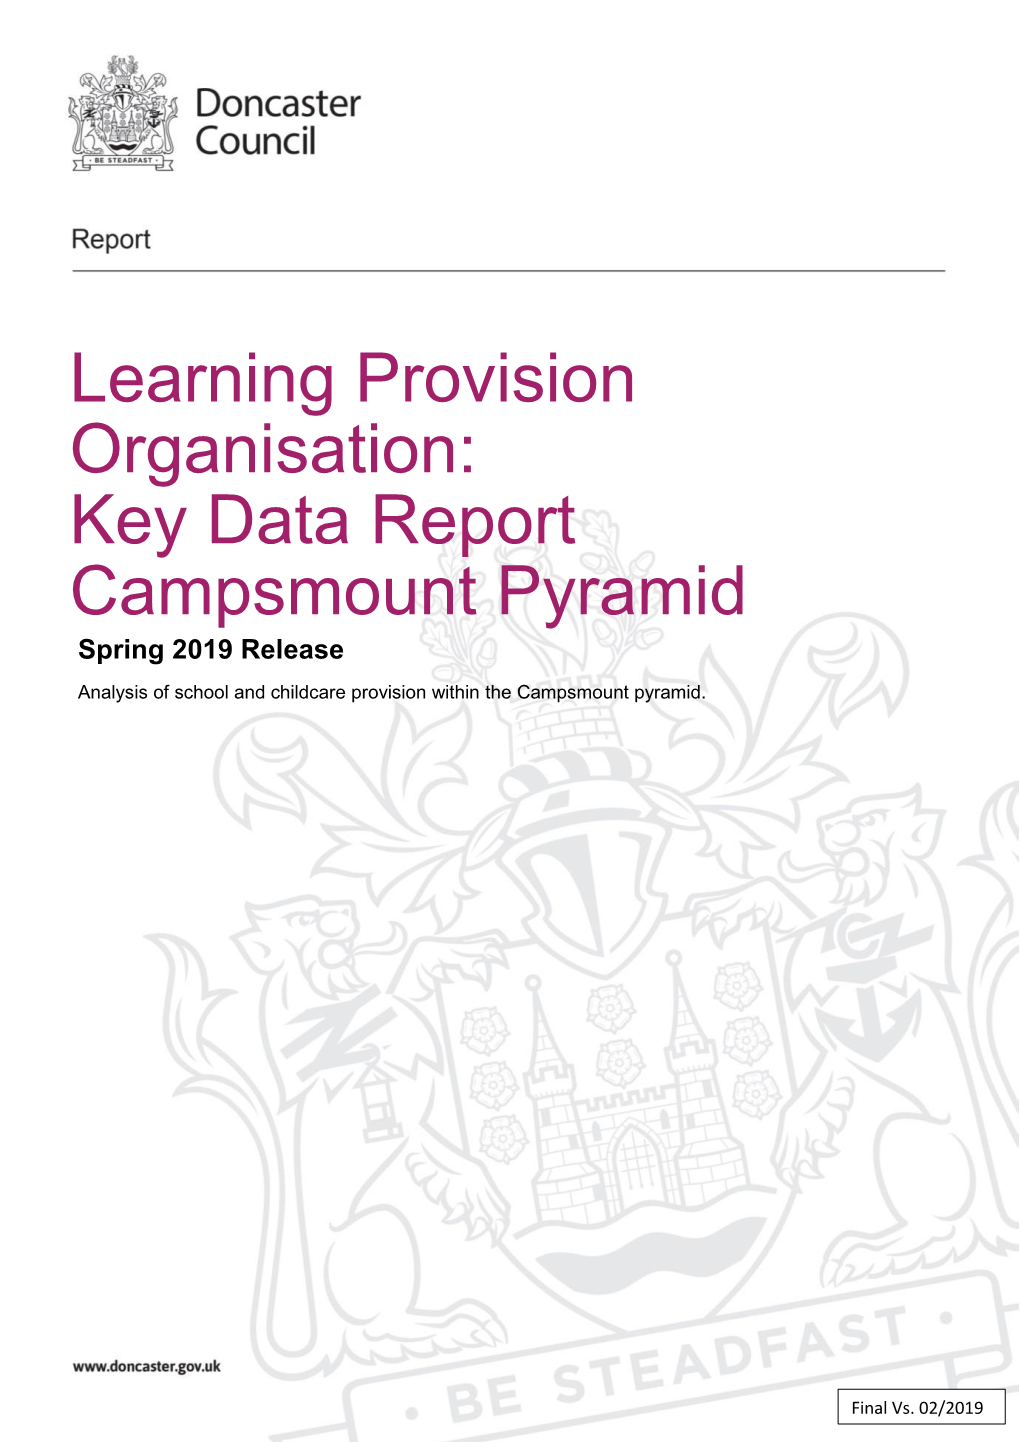 Key Data Report Campsmount Pyramid Spring 2019 Release